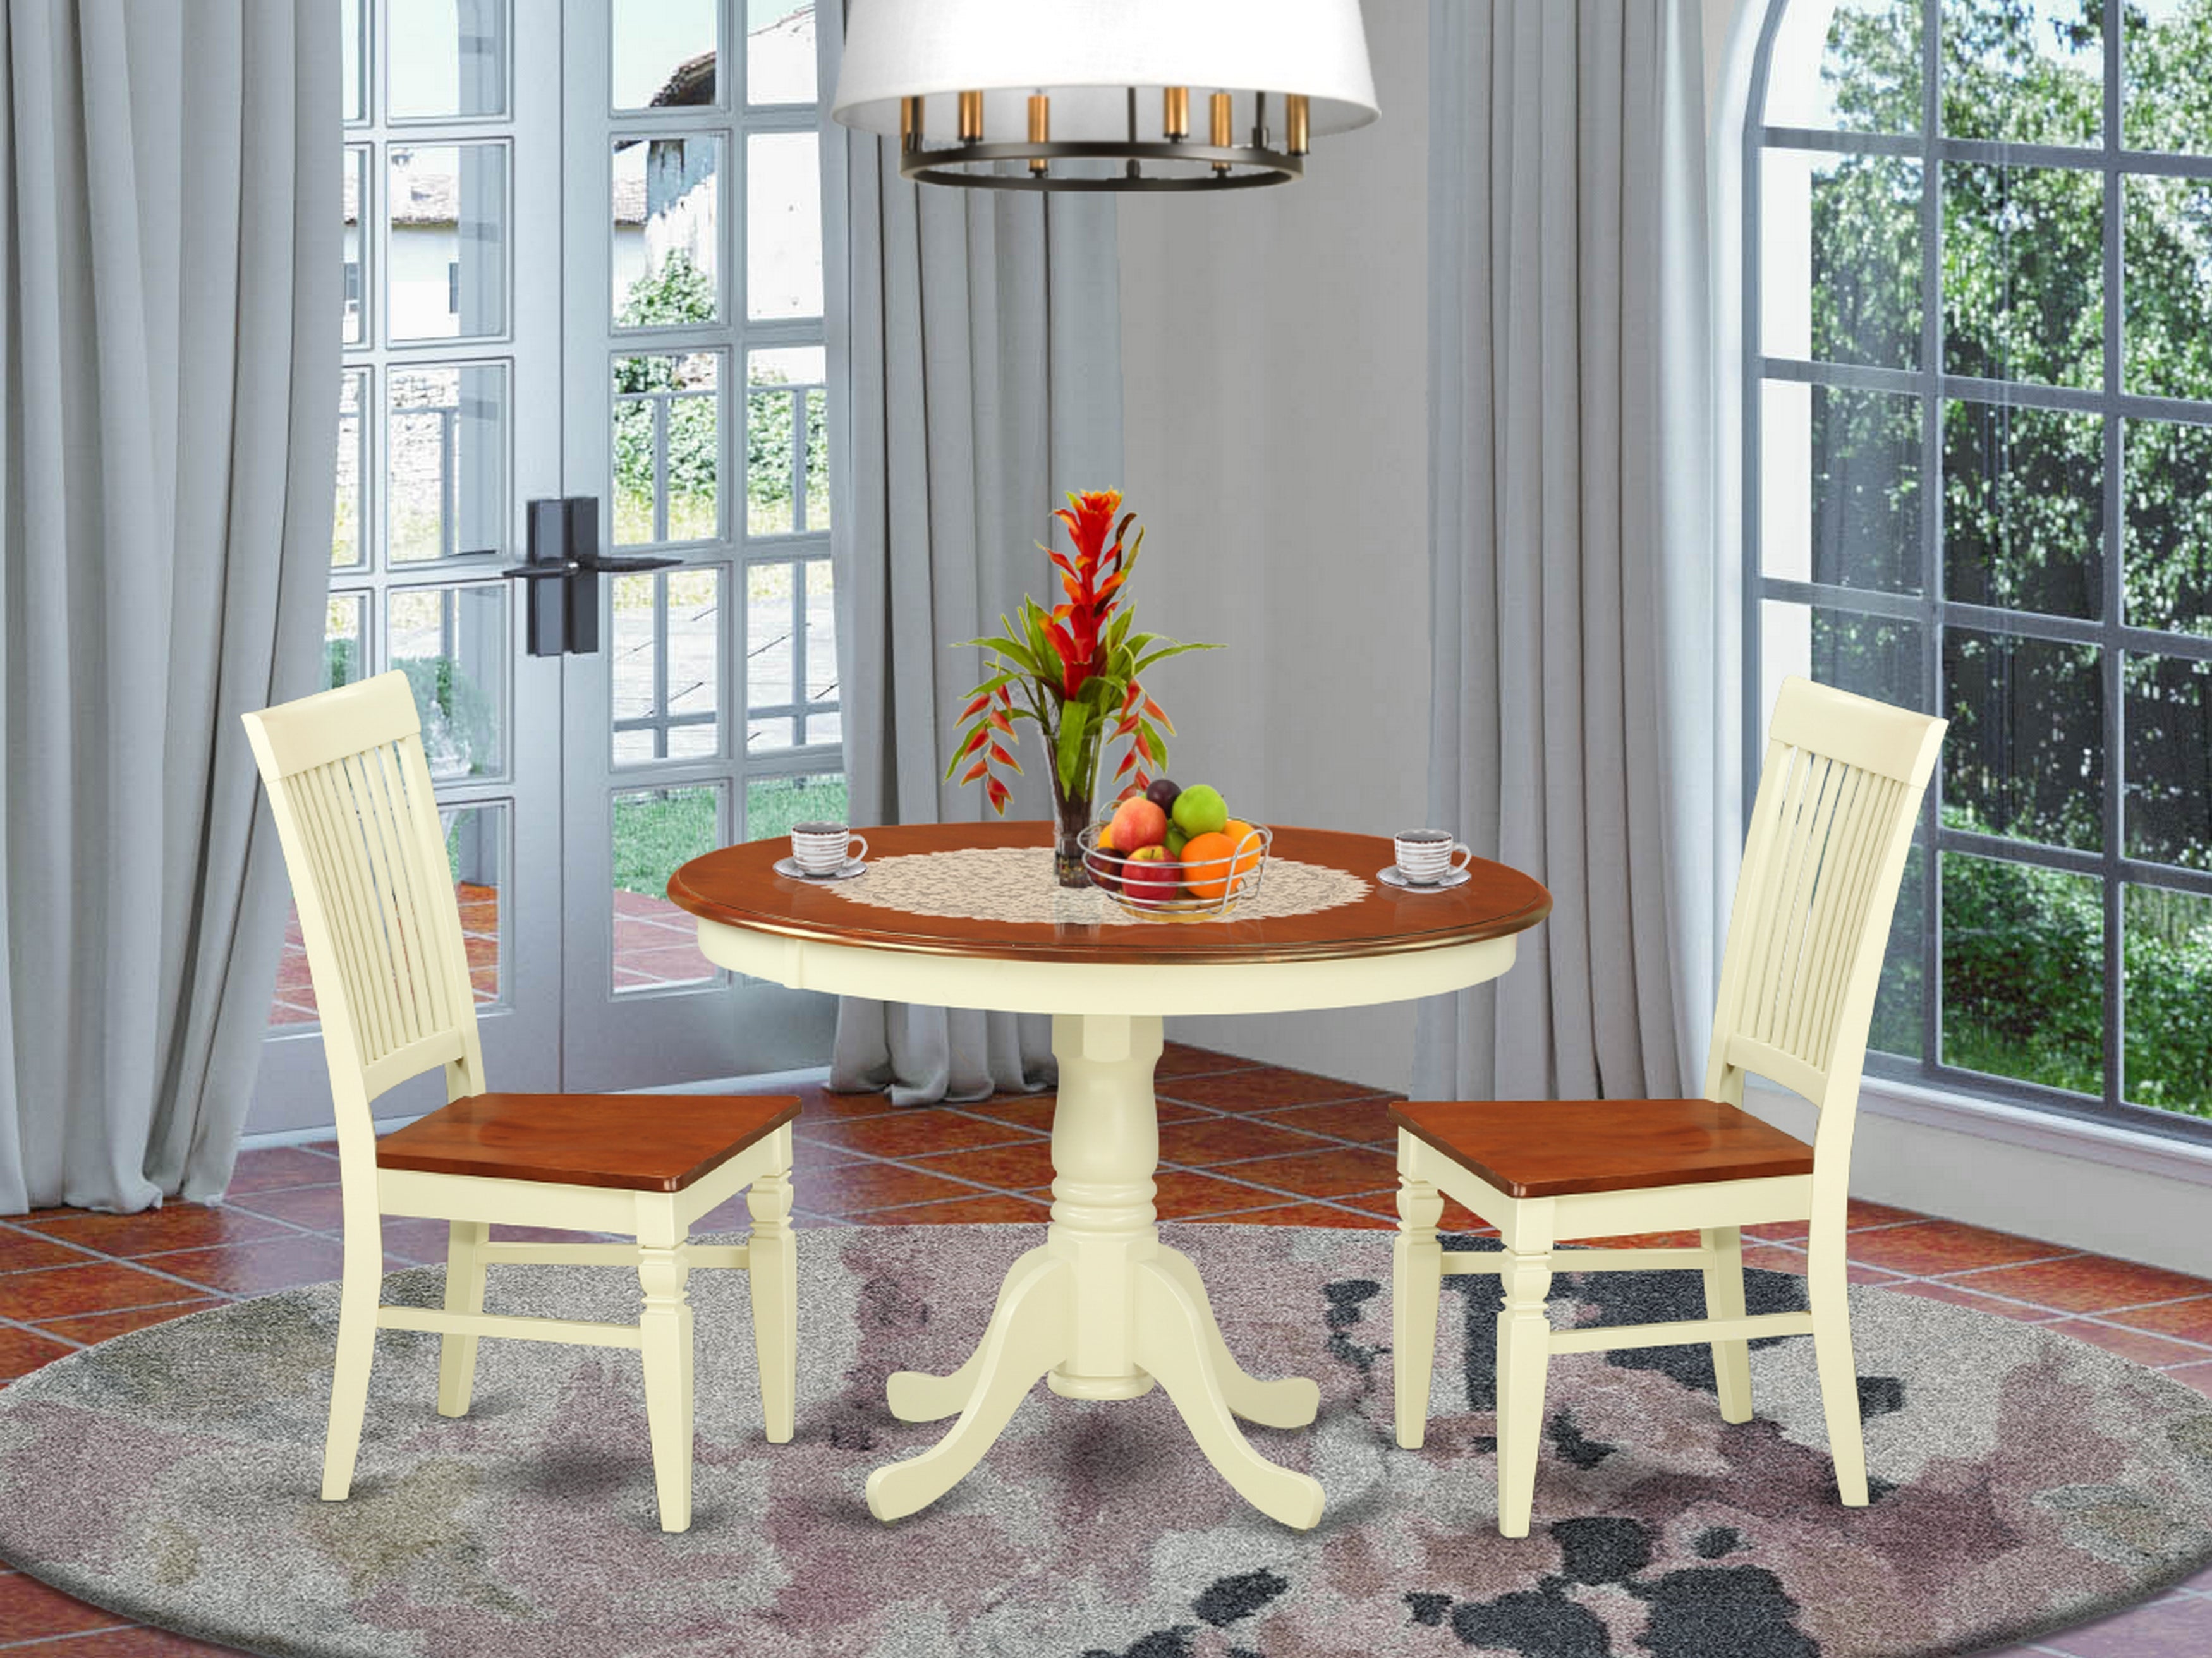 HLWE3-BMK-W 3 Pc Kitchen table set with a Kitchen Table and 2 Wood Seat Dining Chairs in Buttermilk and Cherry